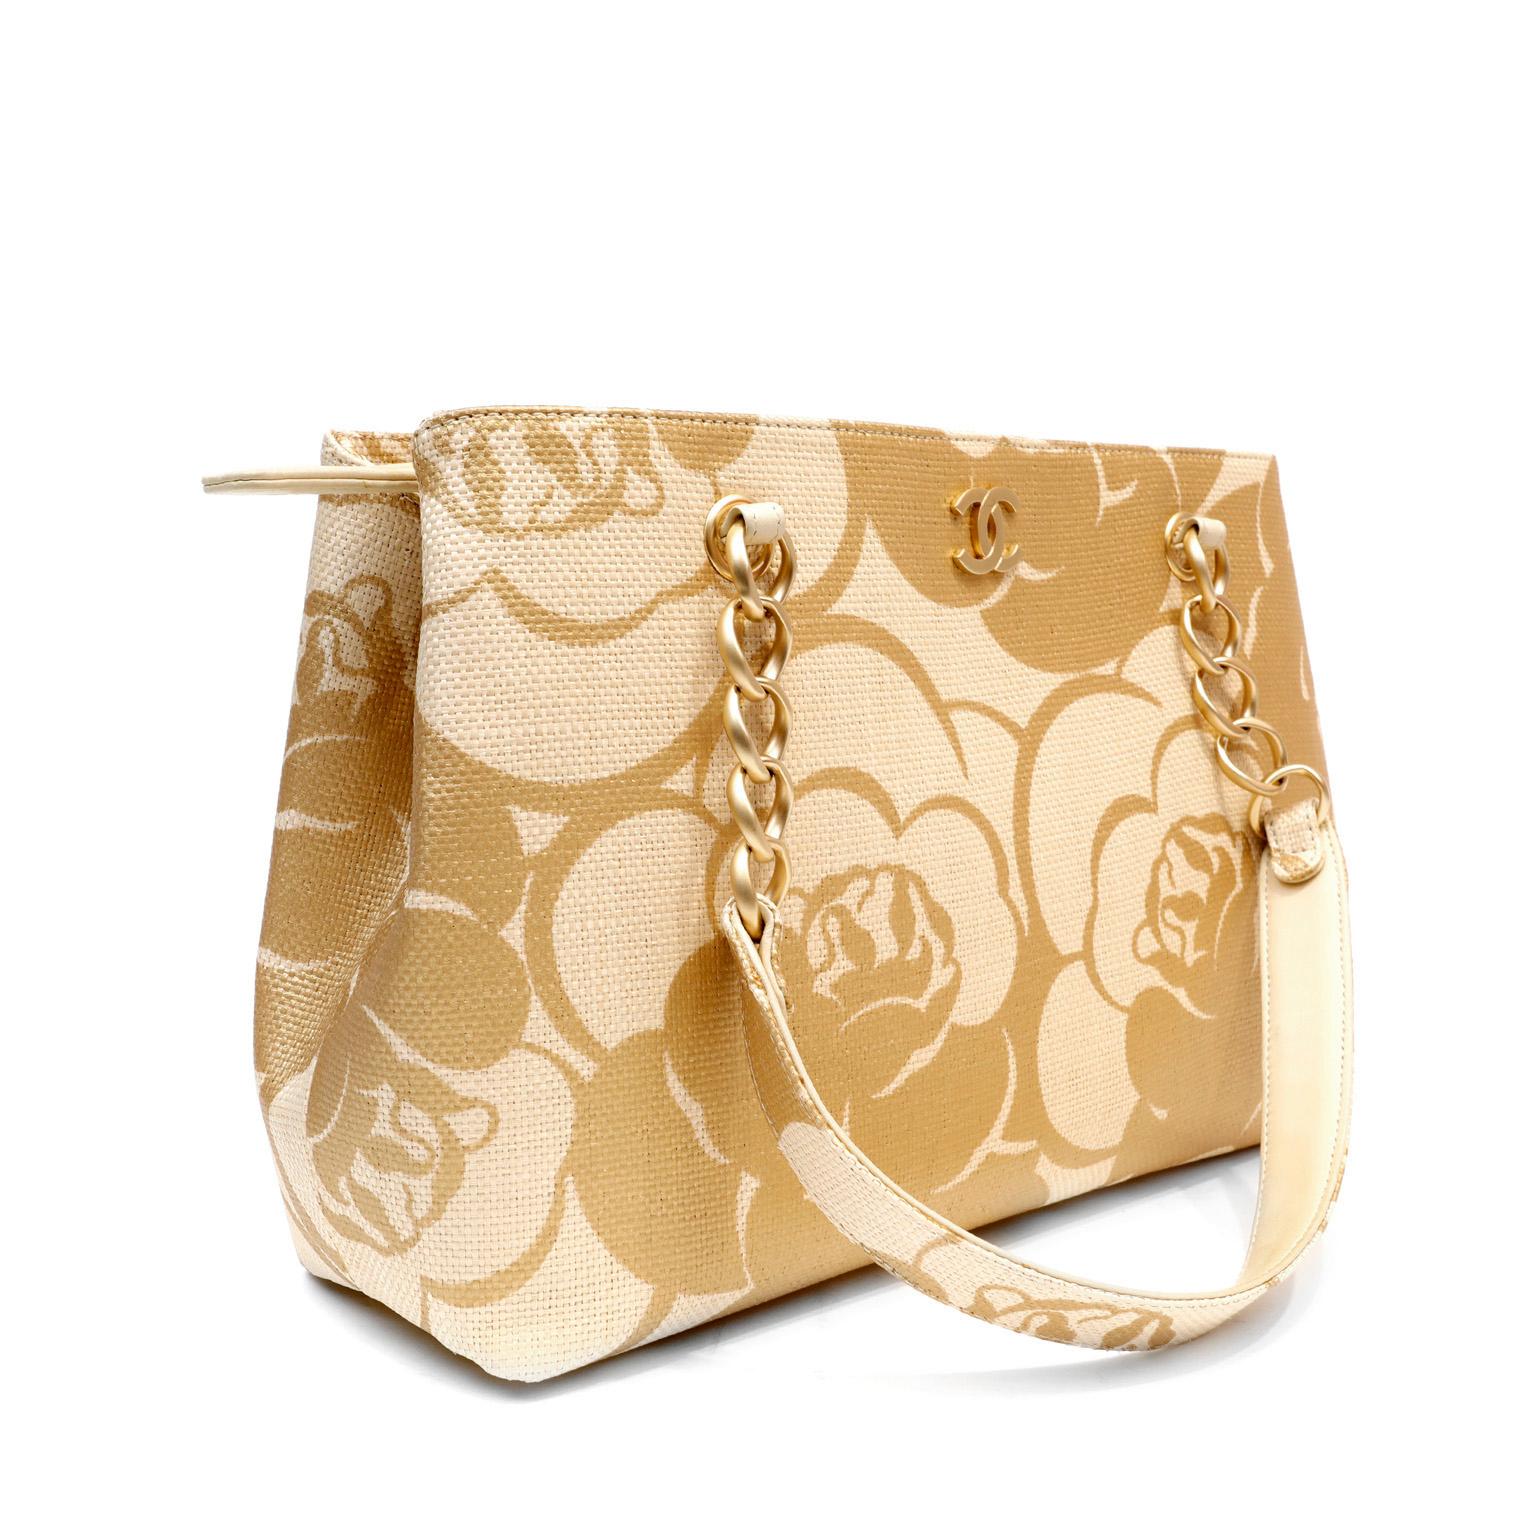 This authentic Chanel Raffia Camellia Tote is in pristine condition.  Elegant for the beach or town, this is a beautiful piece for any holiday. Beige and tan raffia tote with swirling camellia flower abstract pattern.  Matte gold interlocking CC